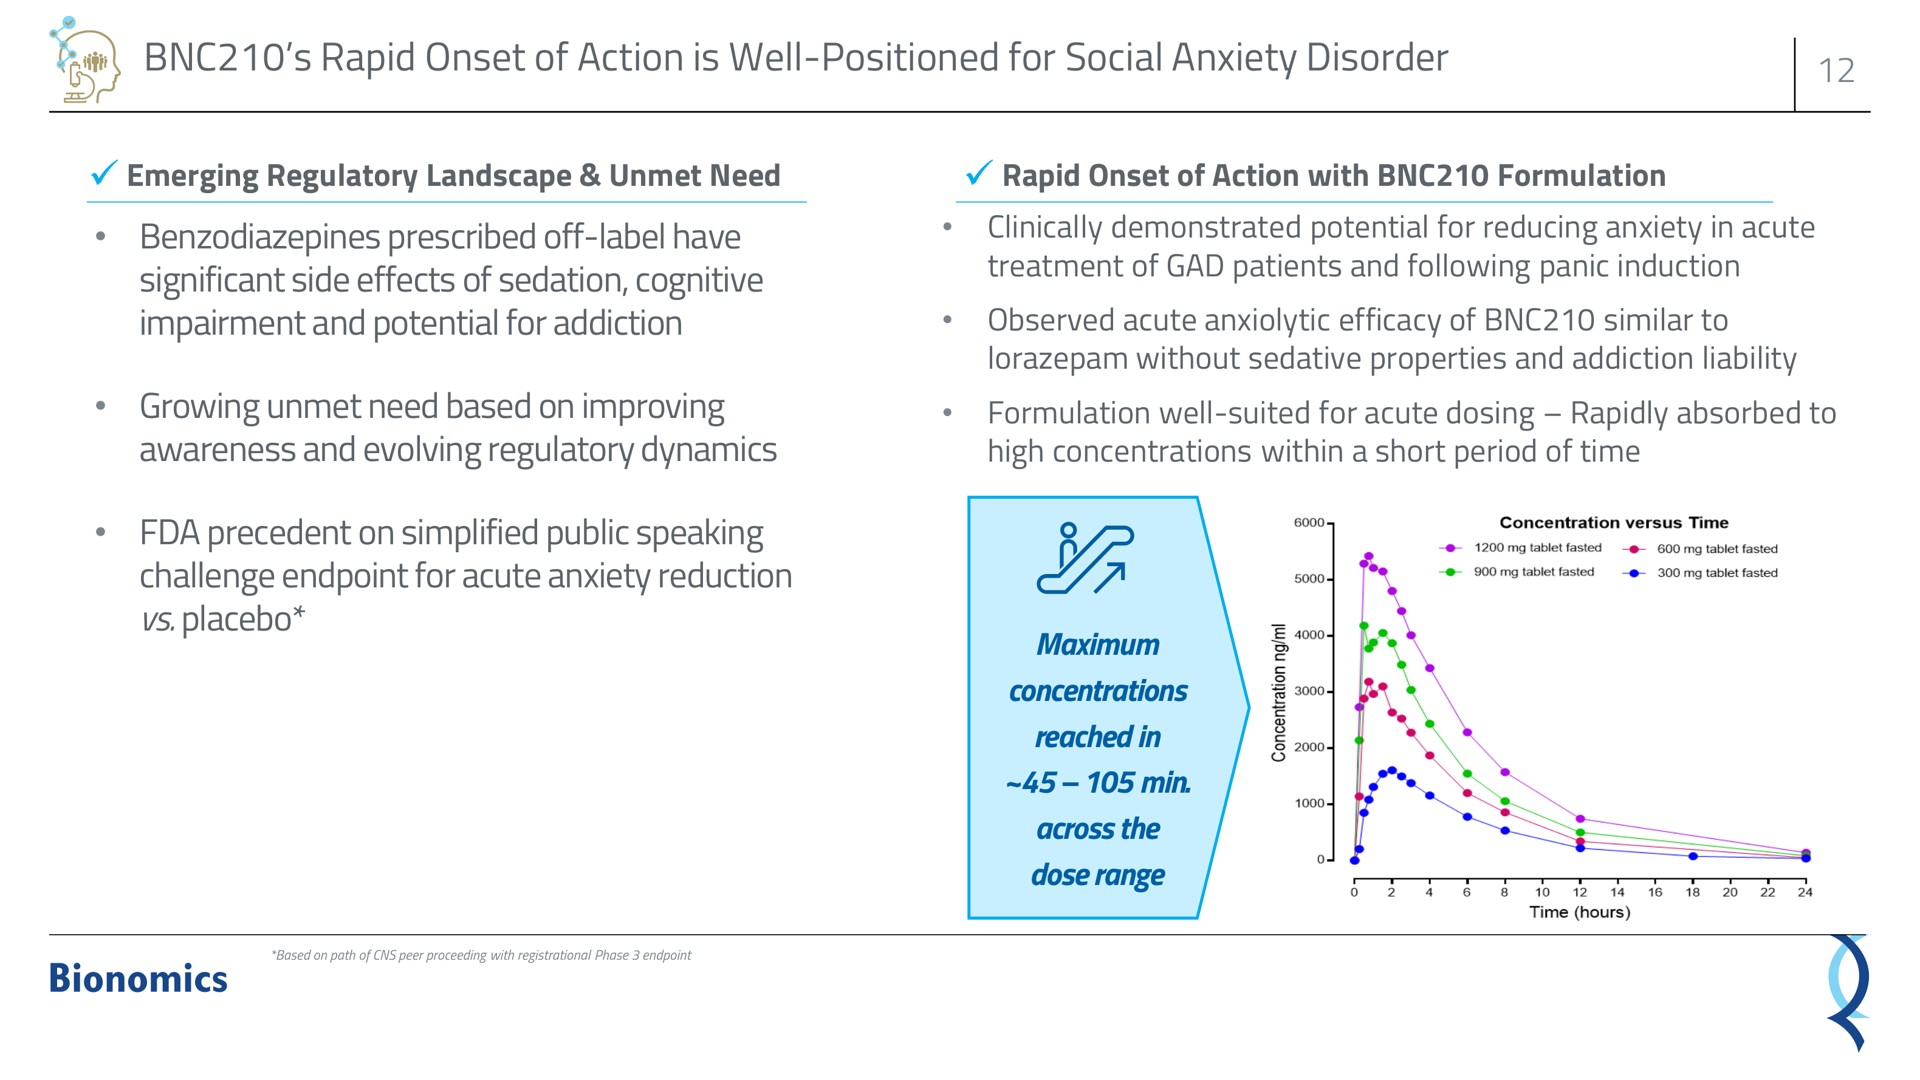 rapid onset of action is well positioned for social anxiety disorder prescribed off label have significant side effects of sedation cognitive impairment and potential for addiction growing unmet need based on improving awareness and evolving regulatory dynamics precedent on simplified public speaking challenge for acute anxiety reduction placebo be | Bionomics